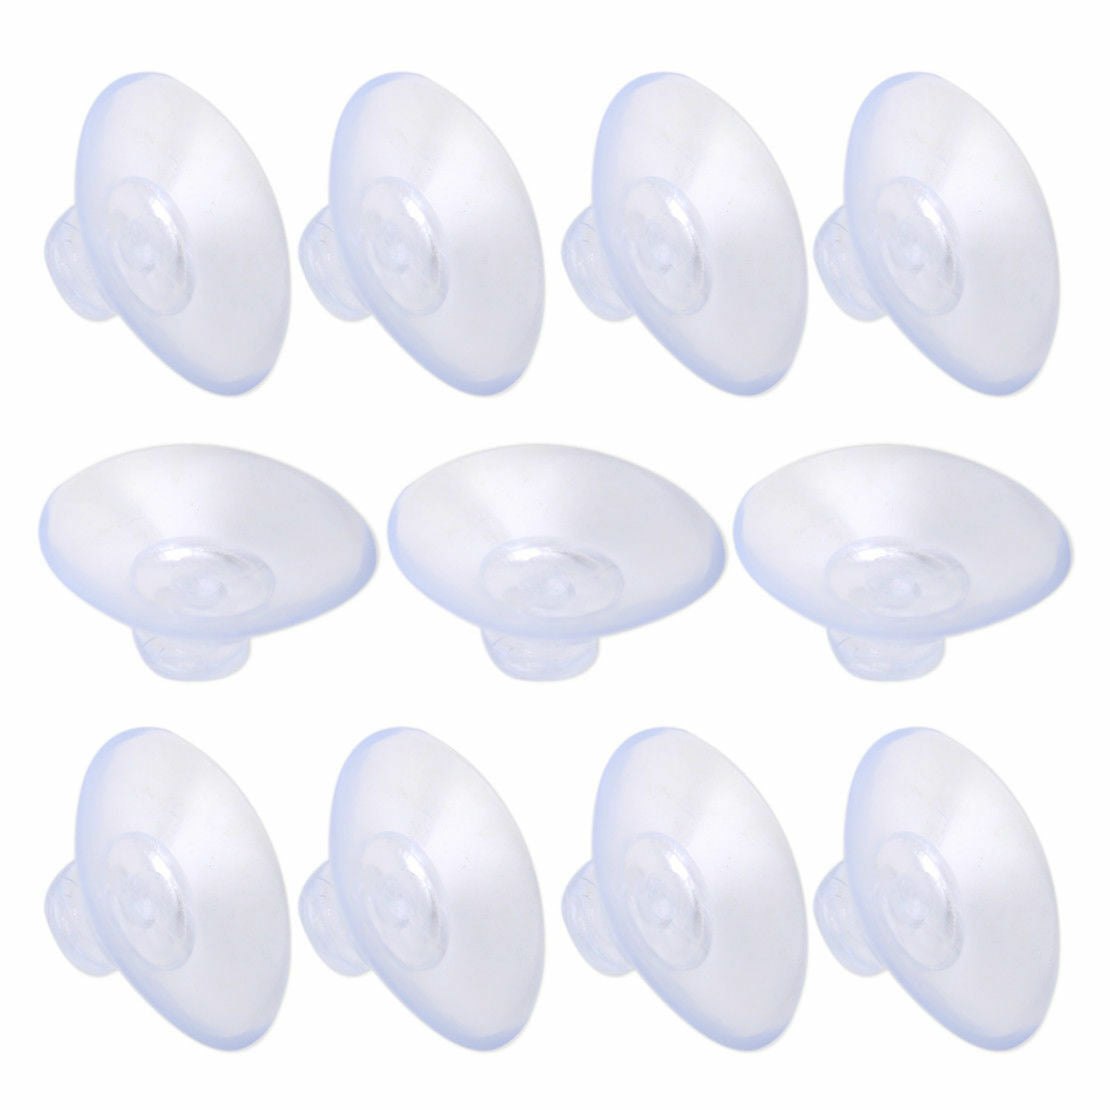 Suction Cups Clear Rubber Plastic Rubber Window Wall Tile Suckers Pads Hook Hang